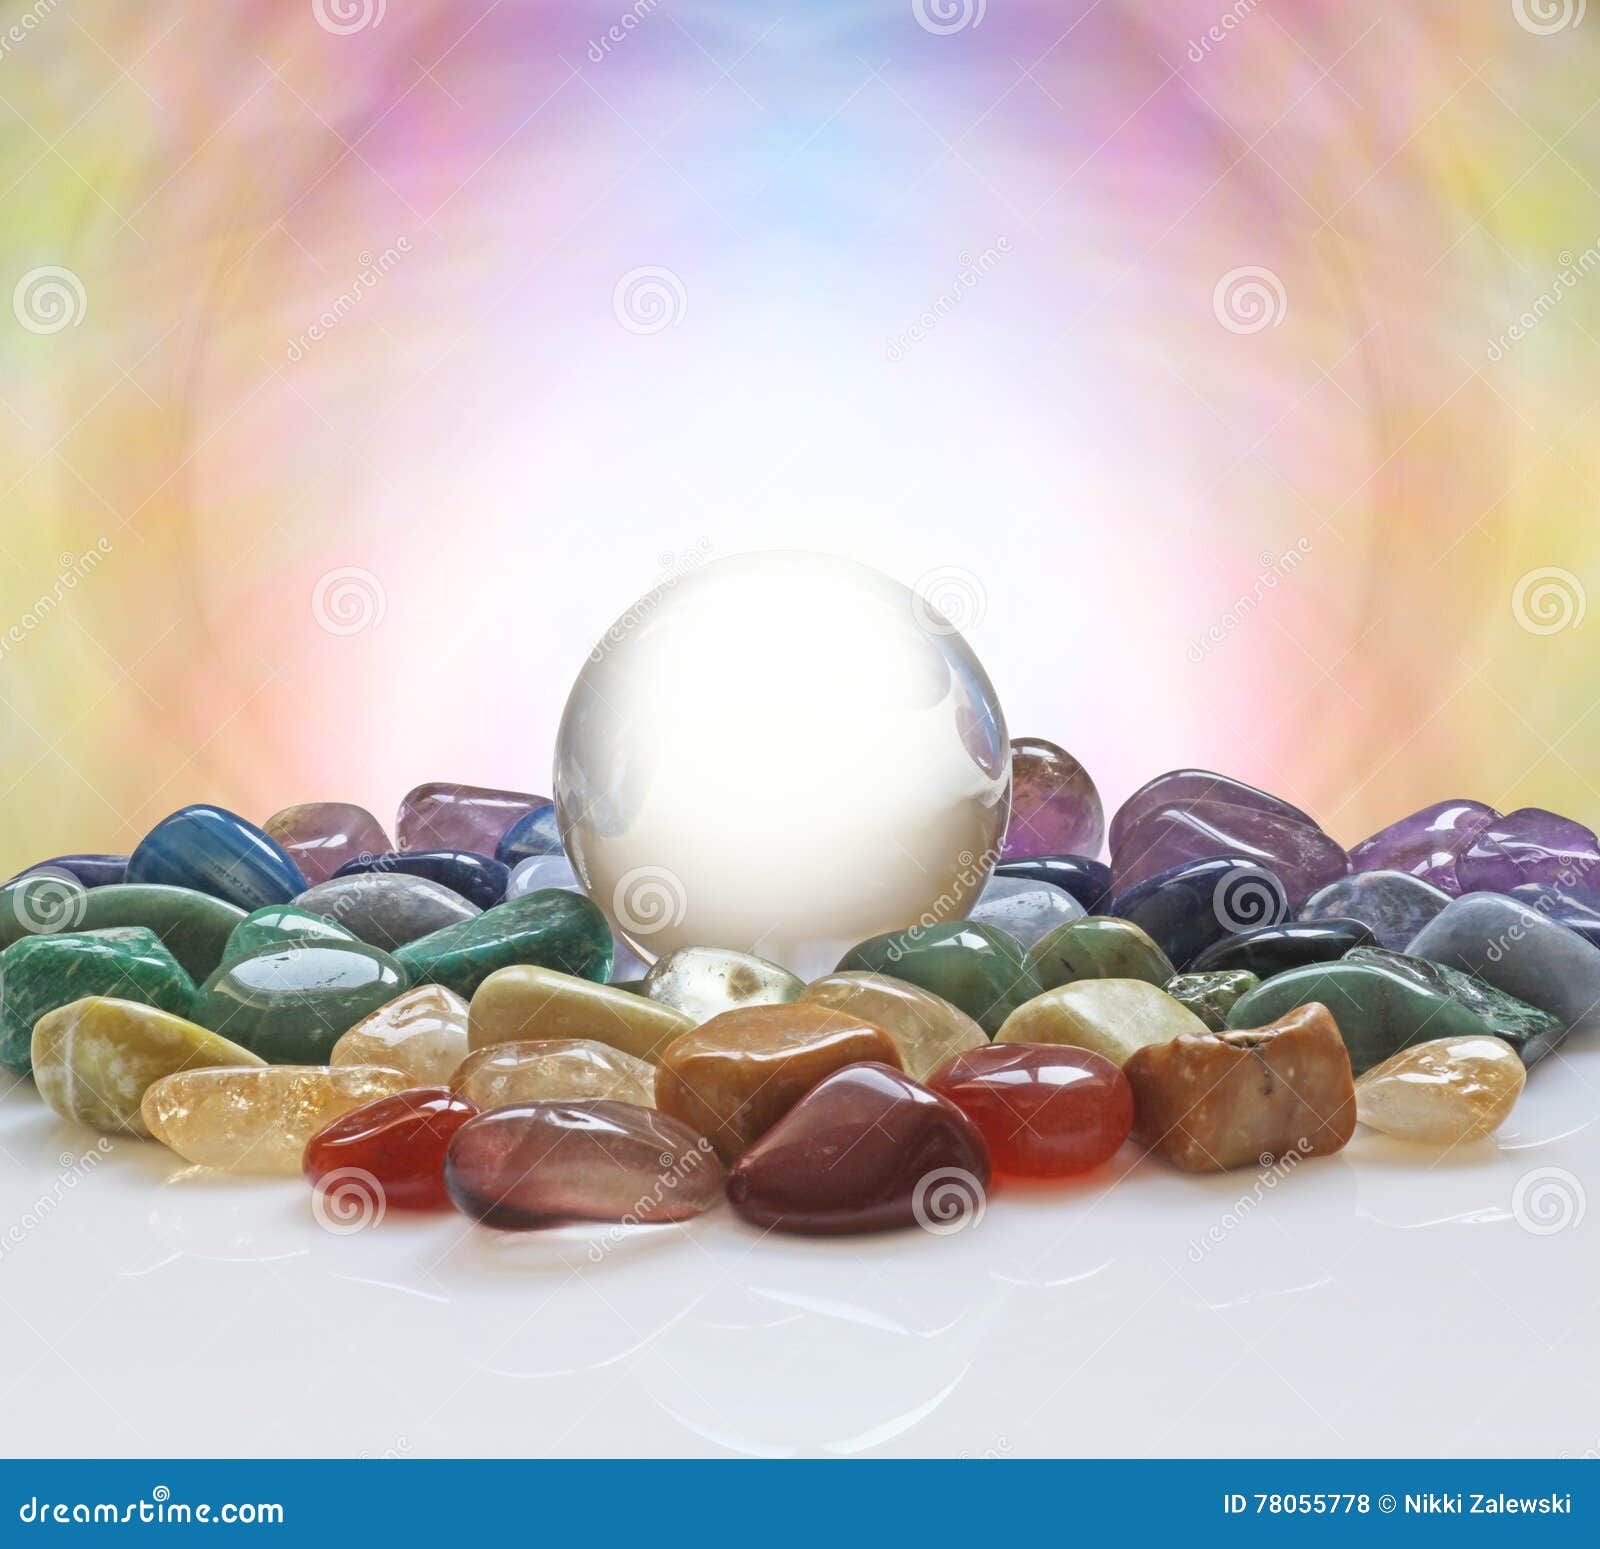 crystal ball surrounded by healing crystals